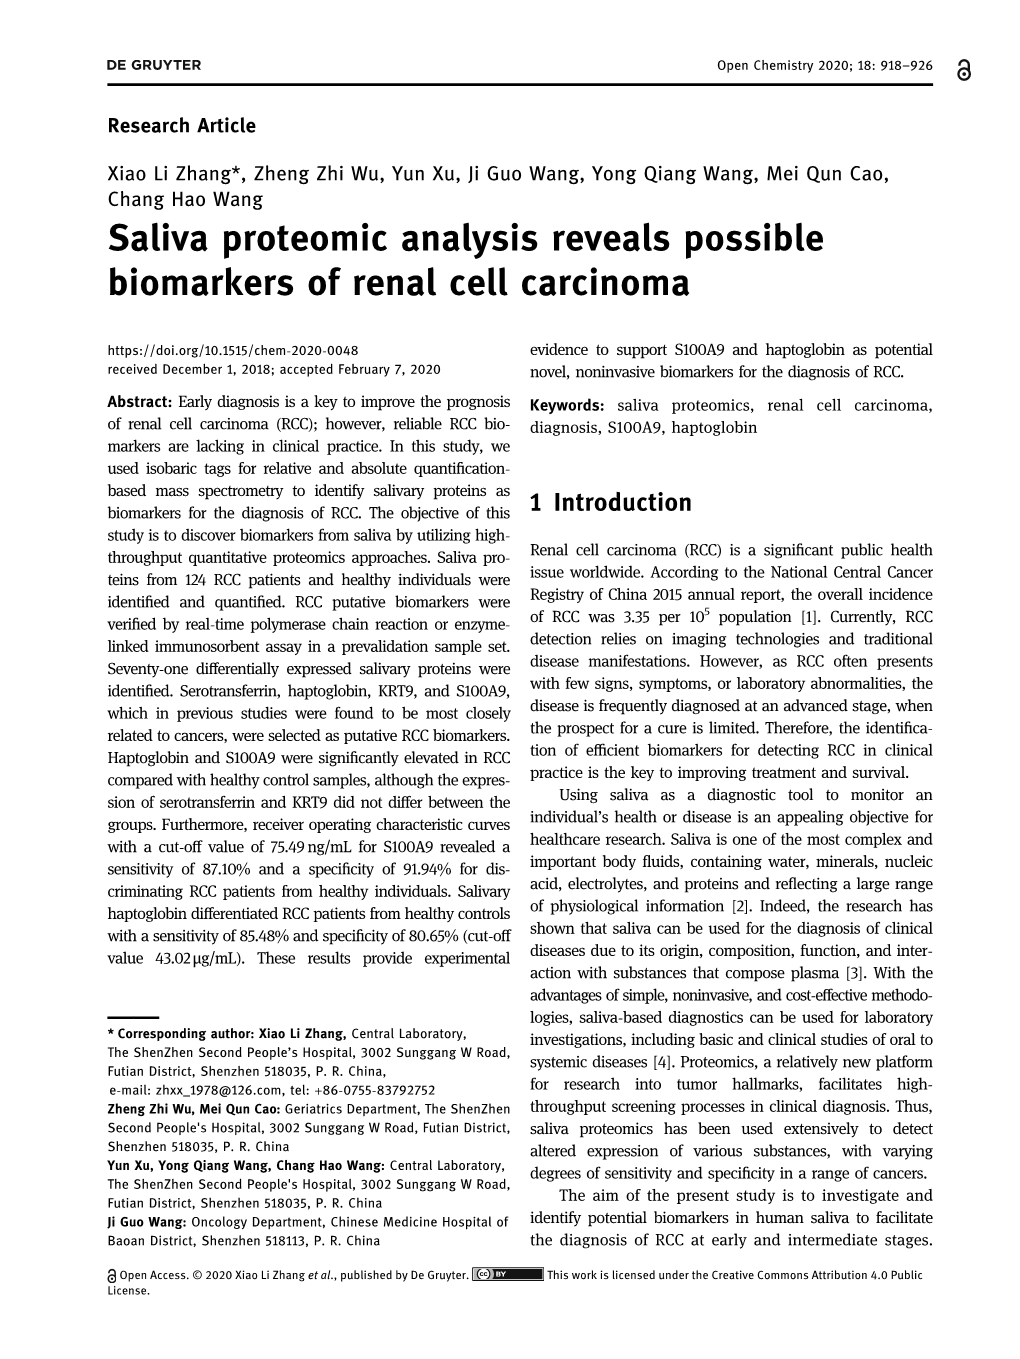 Saliva Proteomic Analysis Reveals Possible Biomarkers of Renal Cell